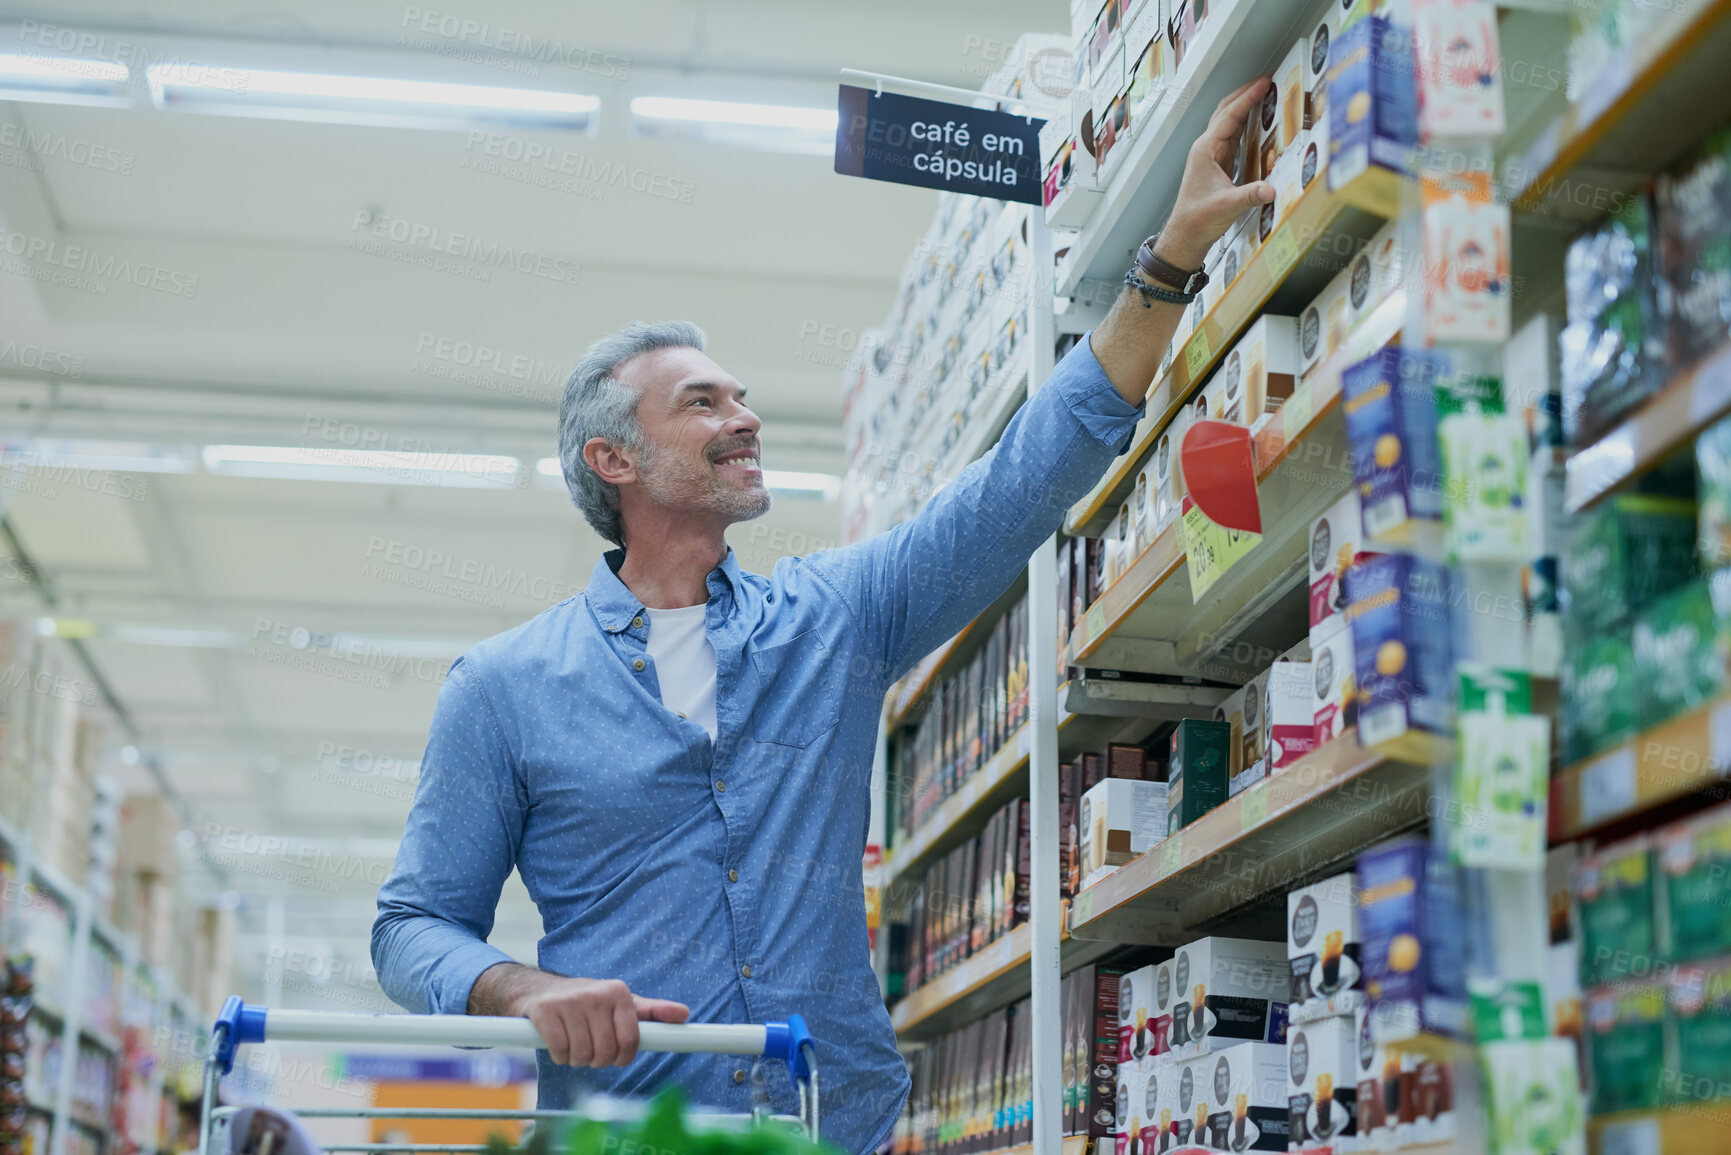 Buy stock photo Shot of a handsome mature man choosing a product from the shelves in a grocery store